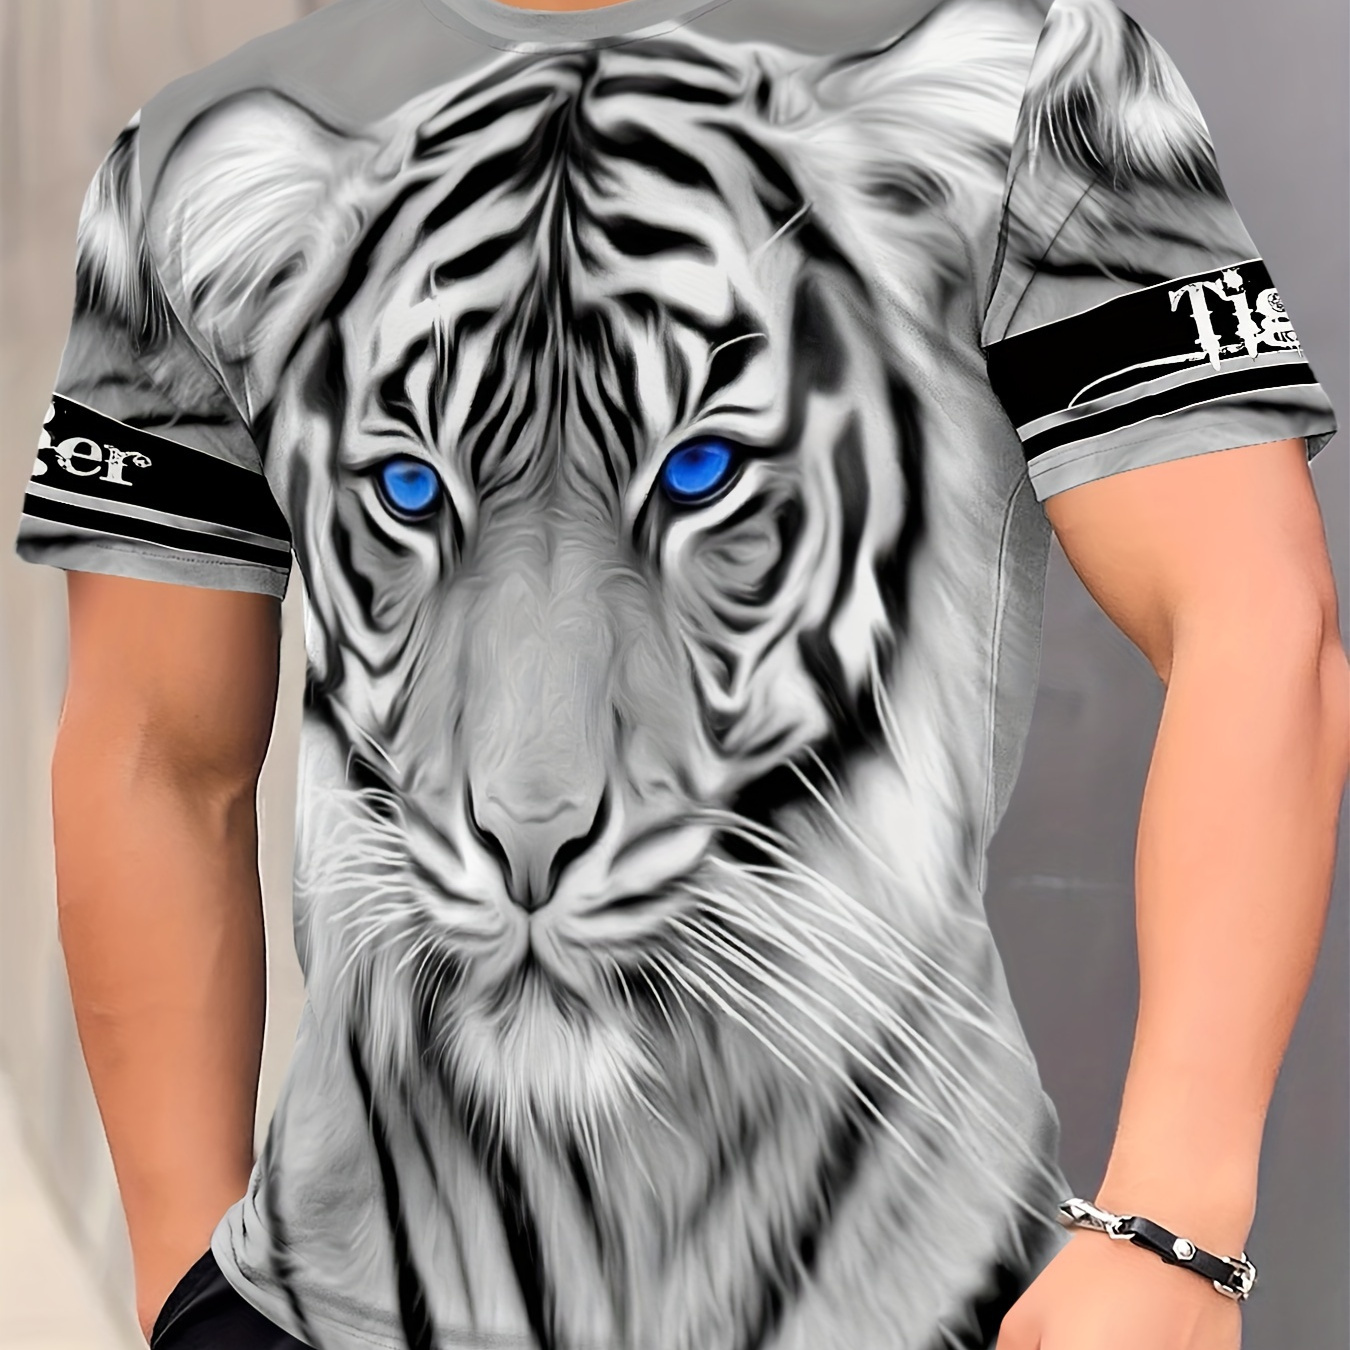 

Men's Tiger Print T-shirt, Casual Short Sleeve Crew Neck Tee, Men's Clothing For Outdoor